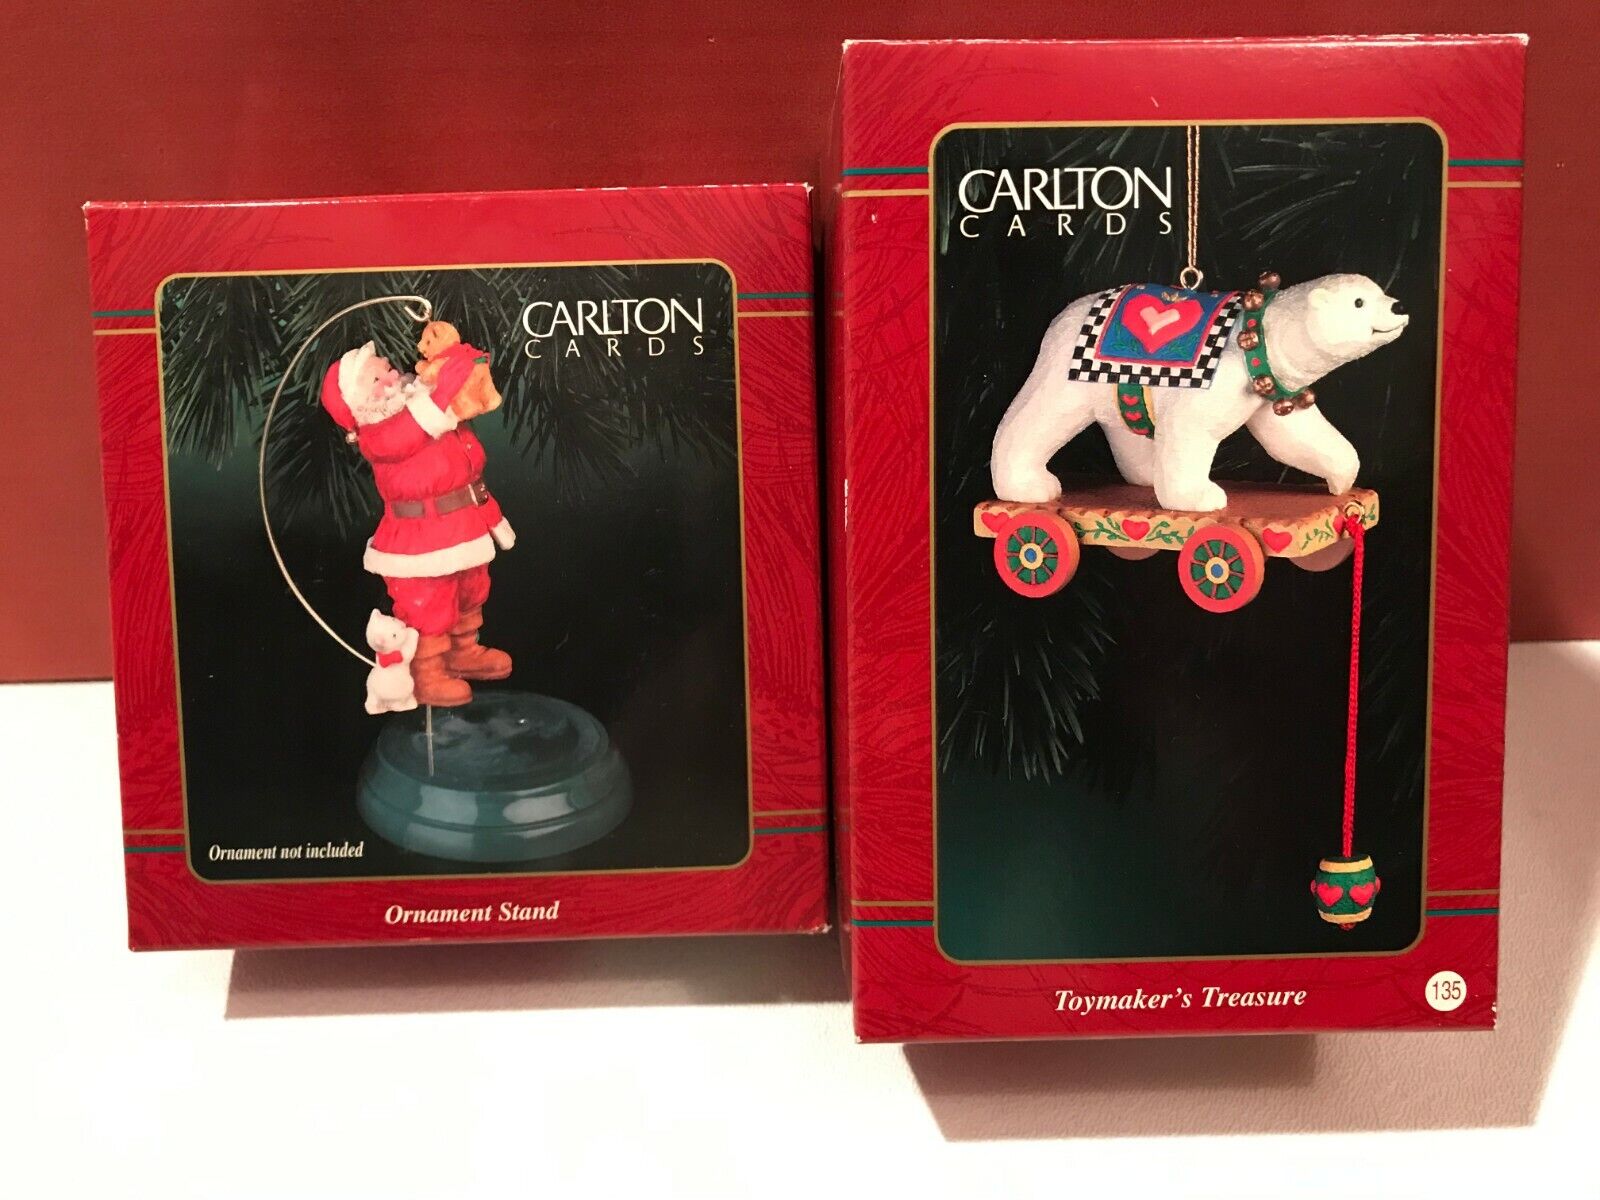 NEW CARLTON HEIRLOOM COLLECTION Toymaker's Treasure XMAS ORNAMENT LOT OF 2 Carlton Cards